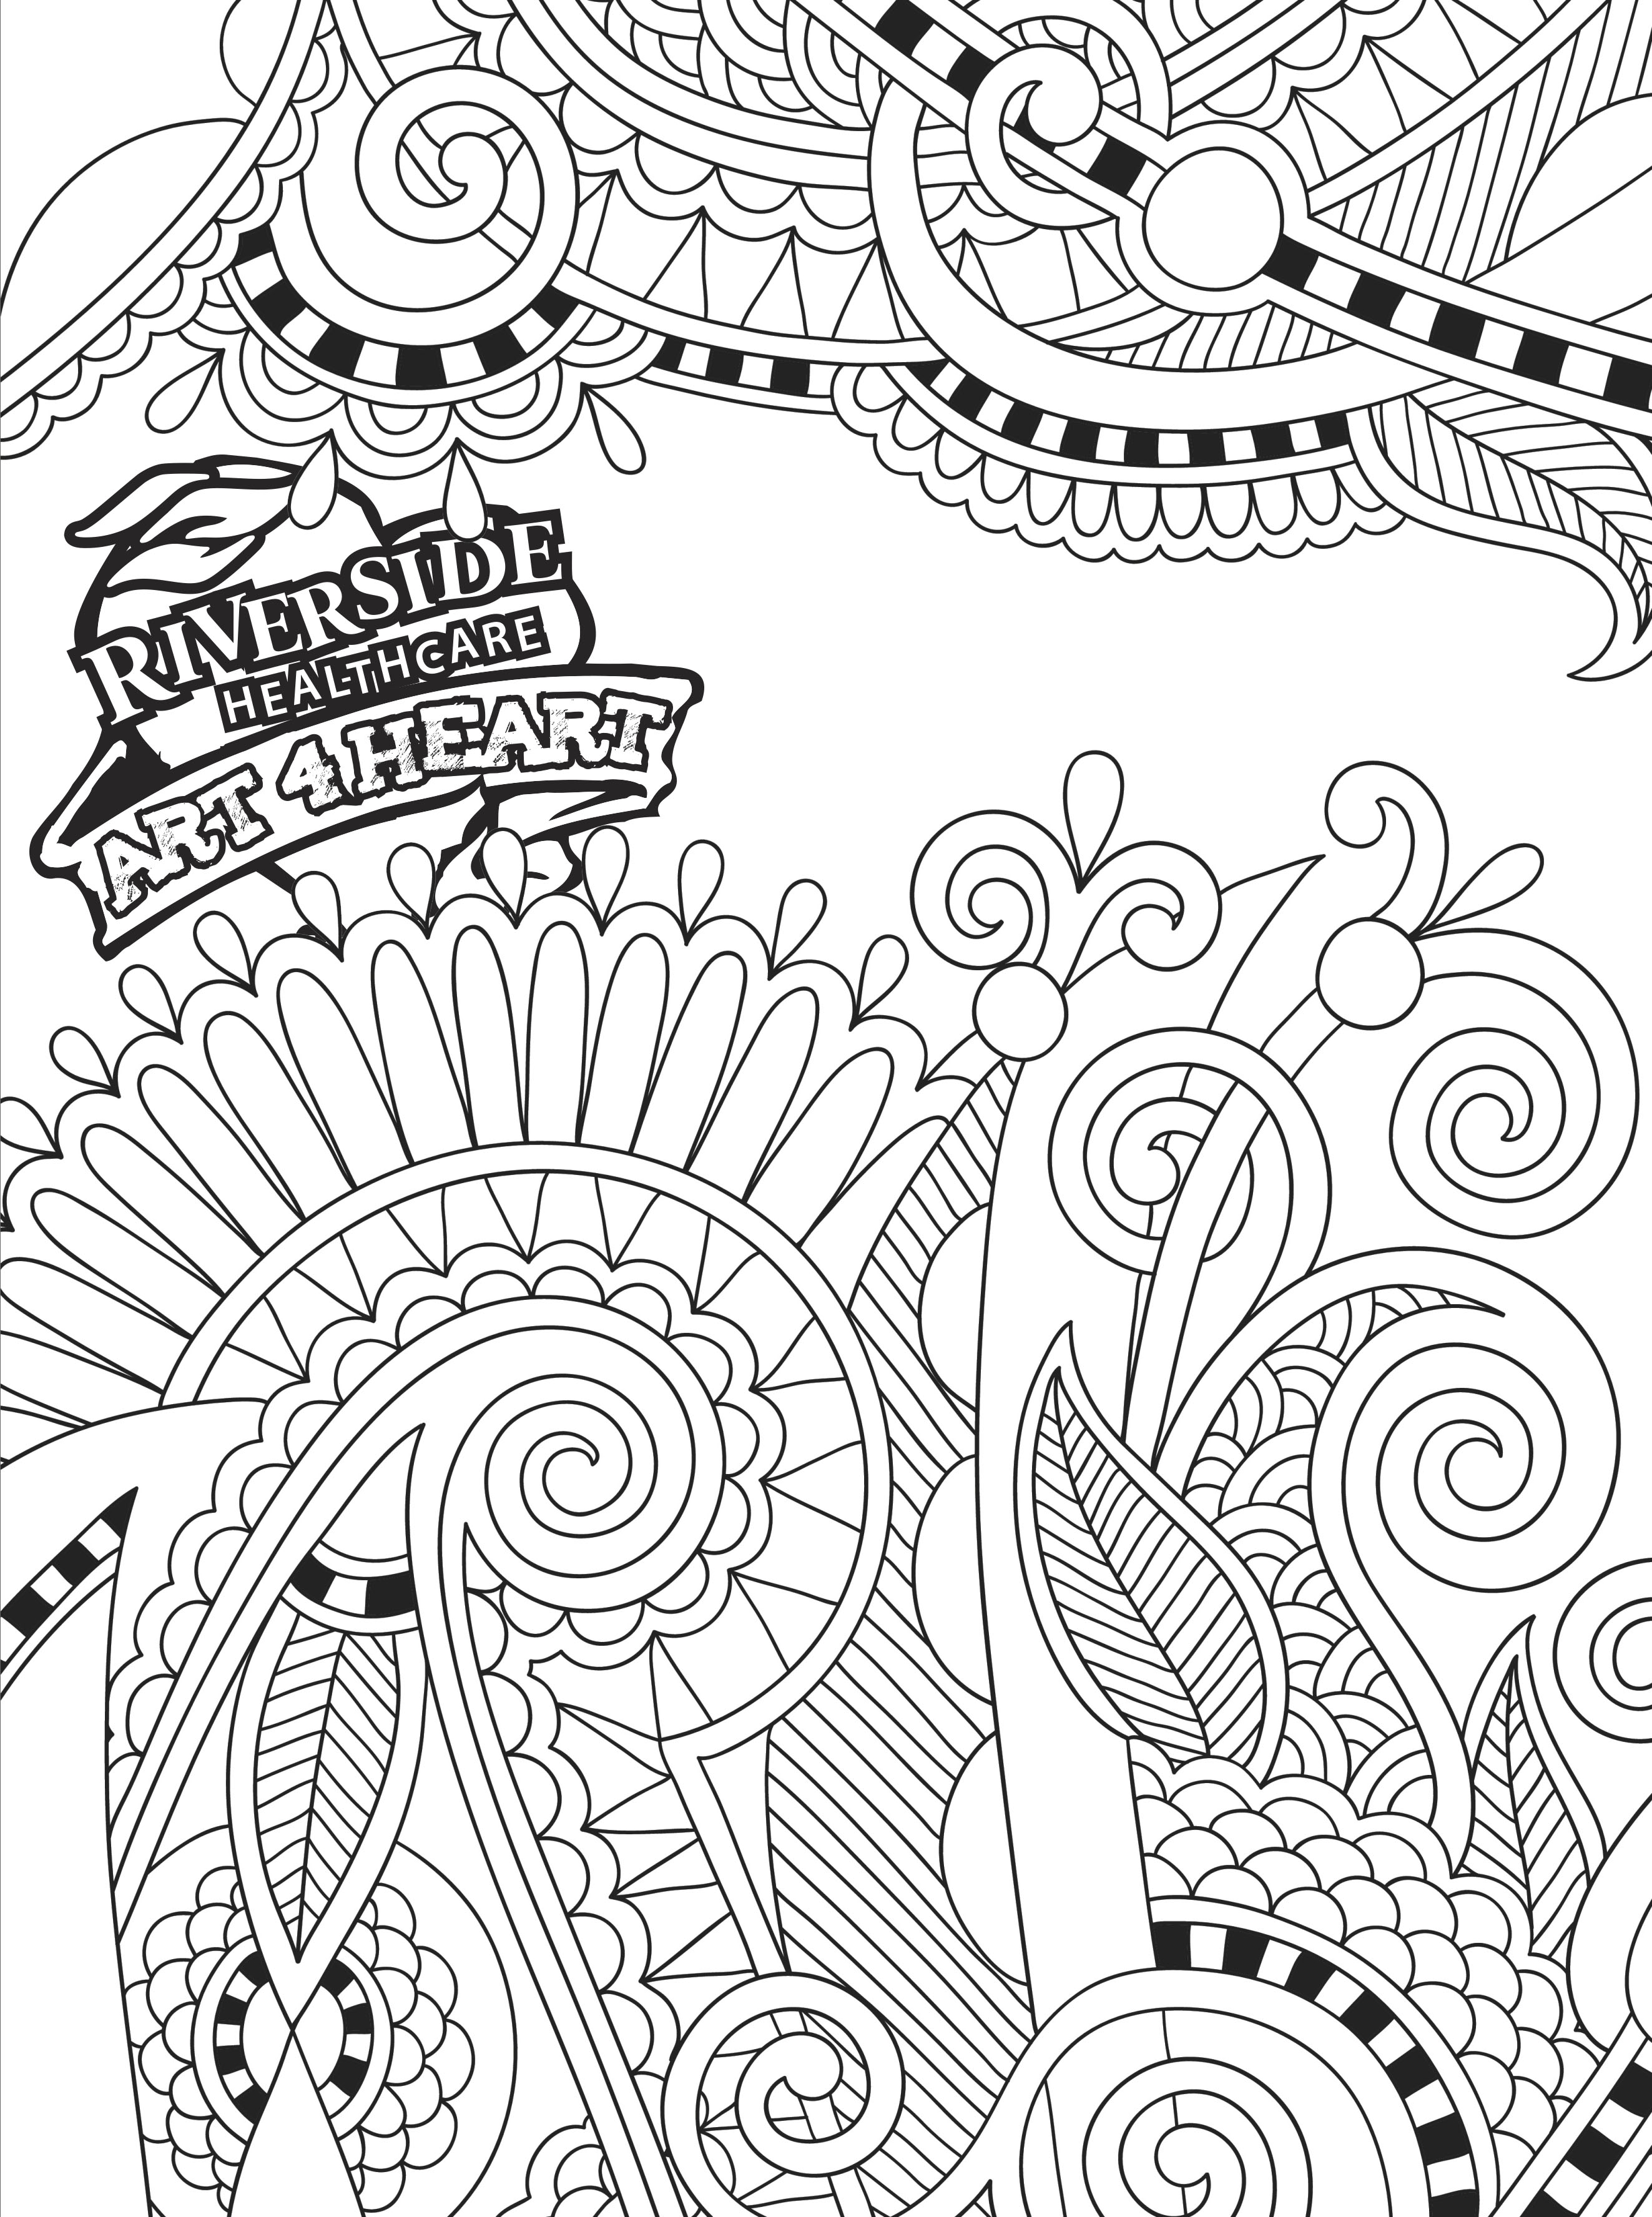 coloring for adults health benefits free coloring pages for kids and adults adults benefits coloring for health 